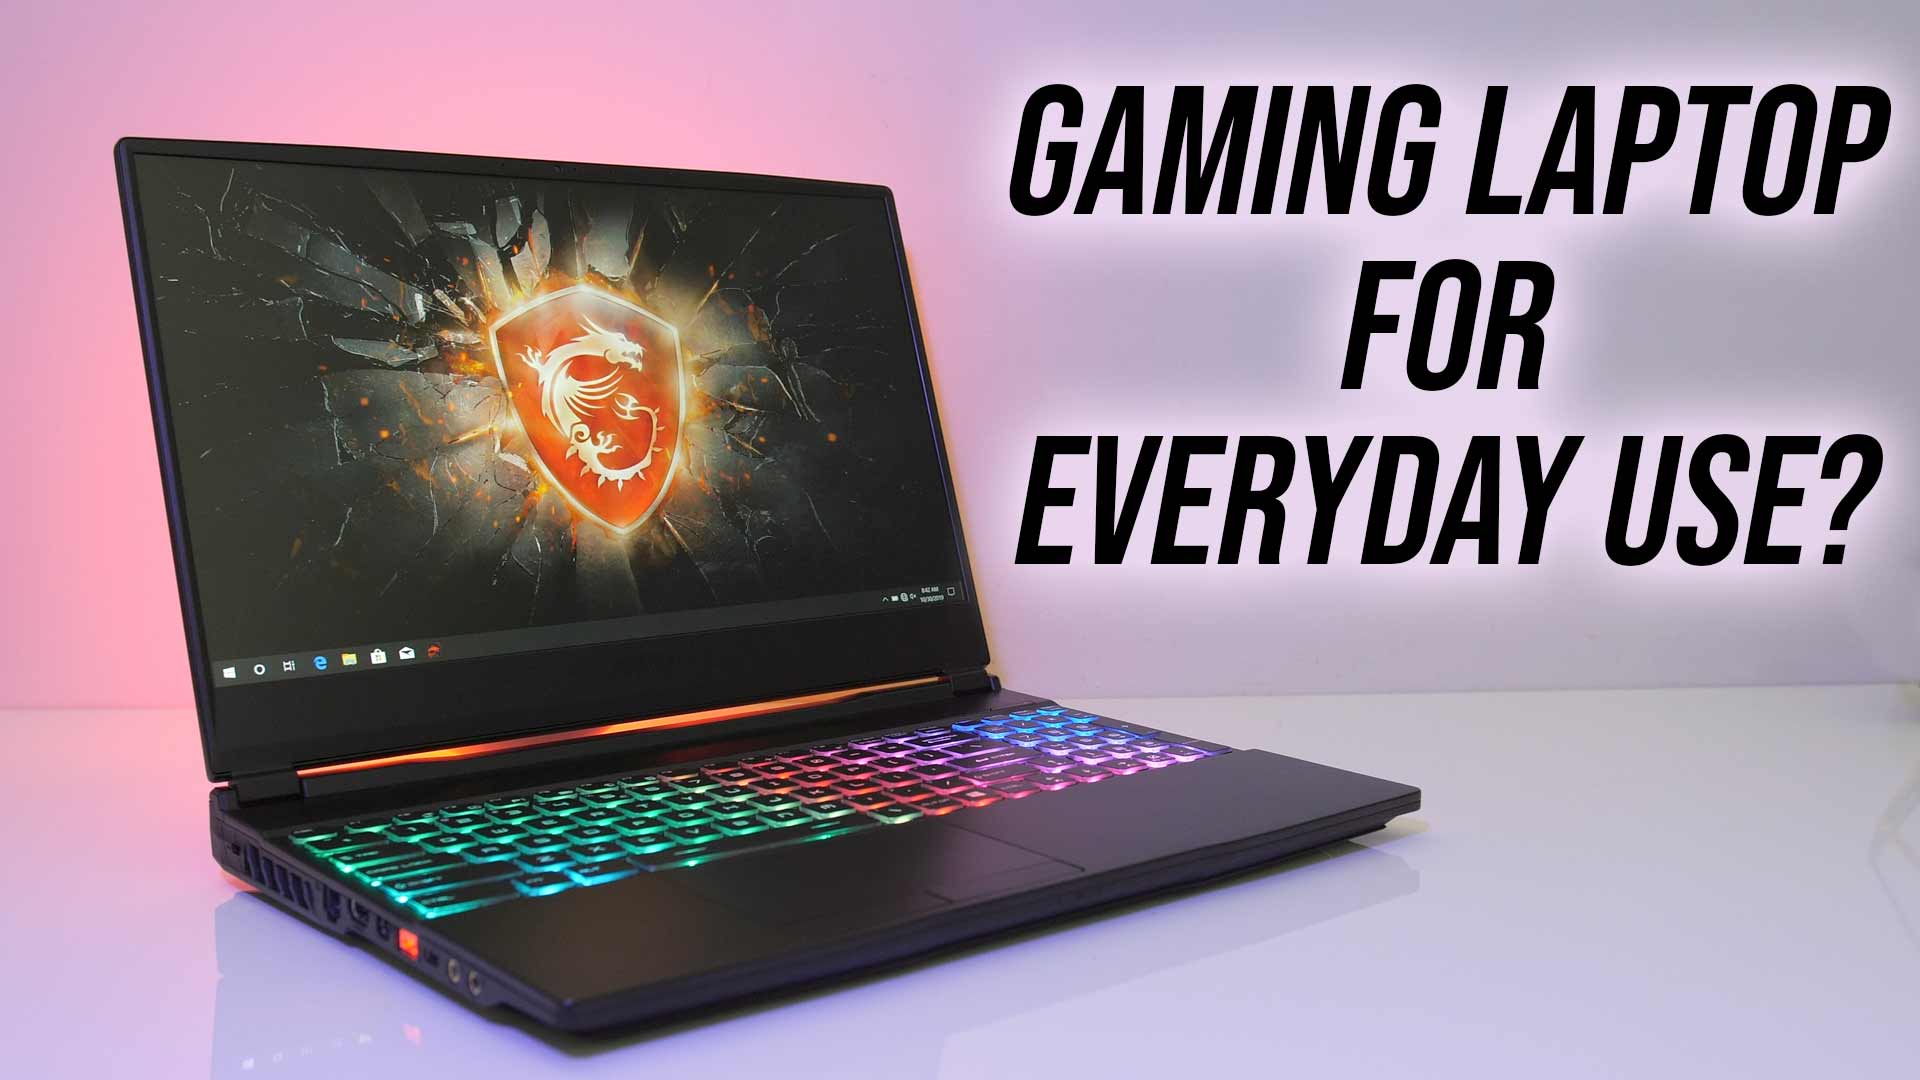 Are Gaming Laptops Good for Everyday Use?